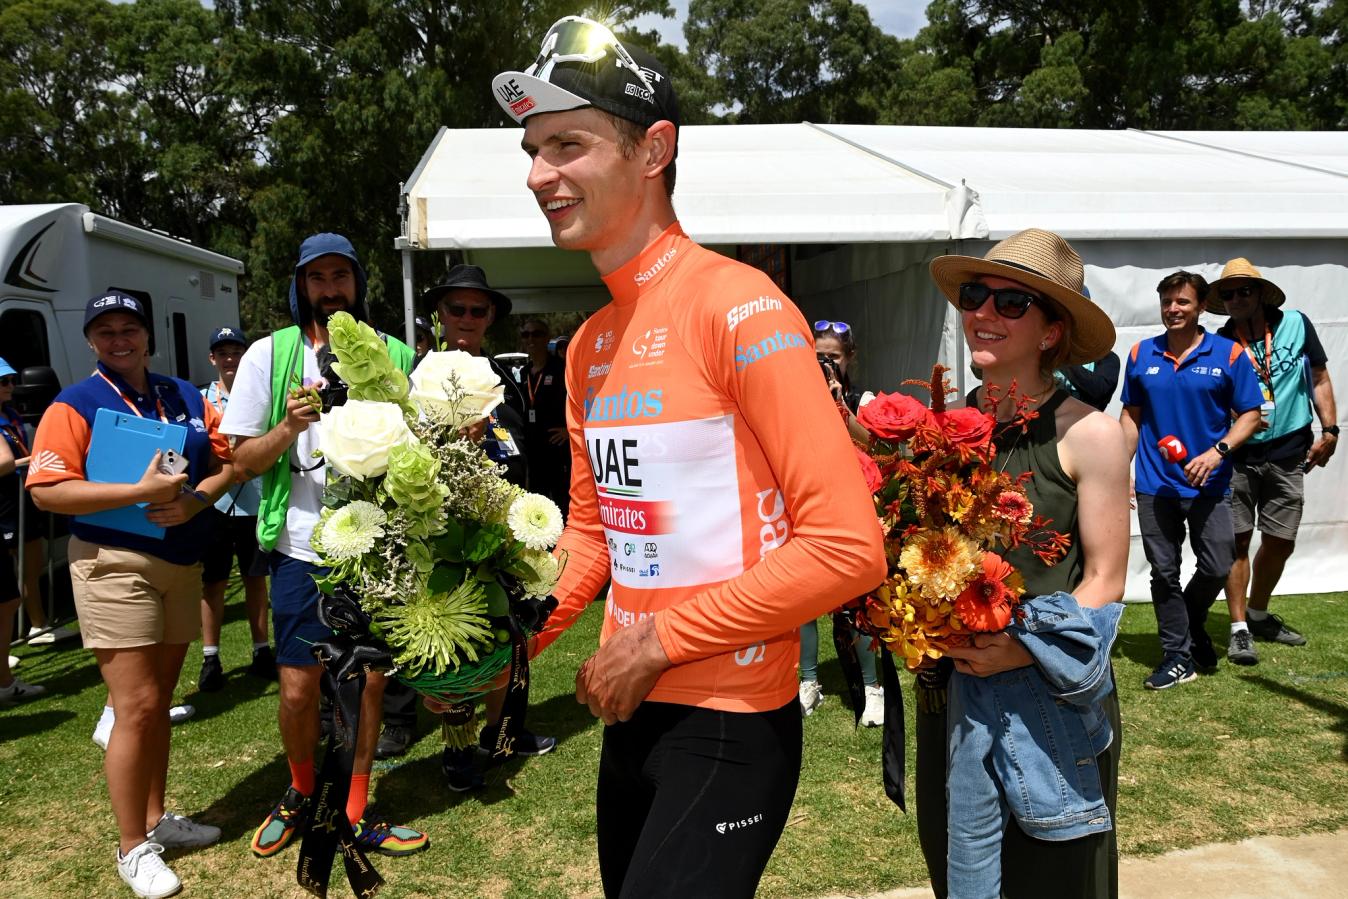 Jay Vine and his wife Bre are all smiles at the Tour Down Under, though Vine knows that his family will far outweigh any personal accomplishments in 50 years' time